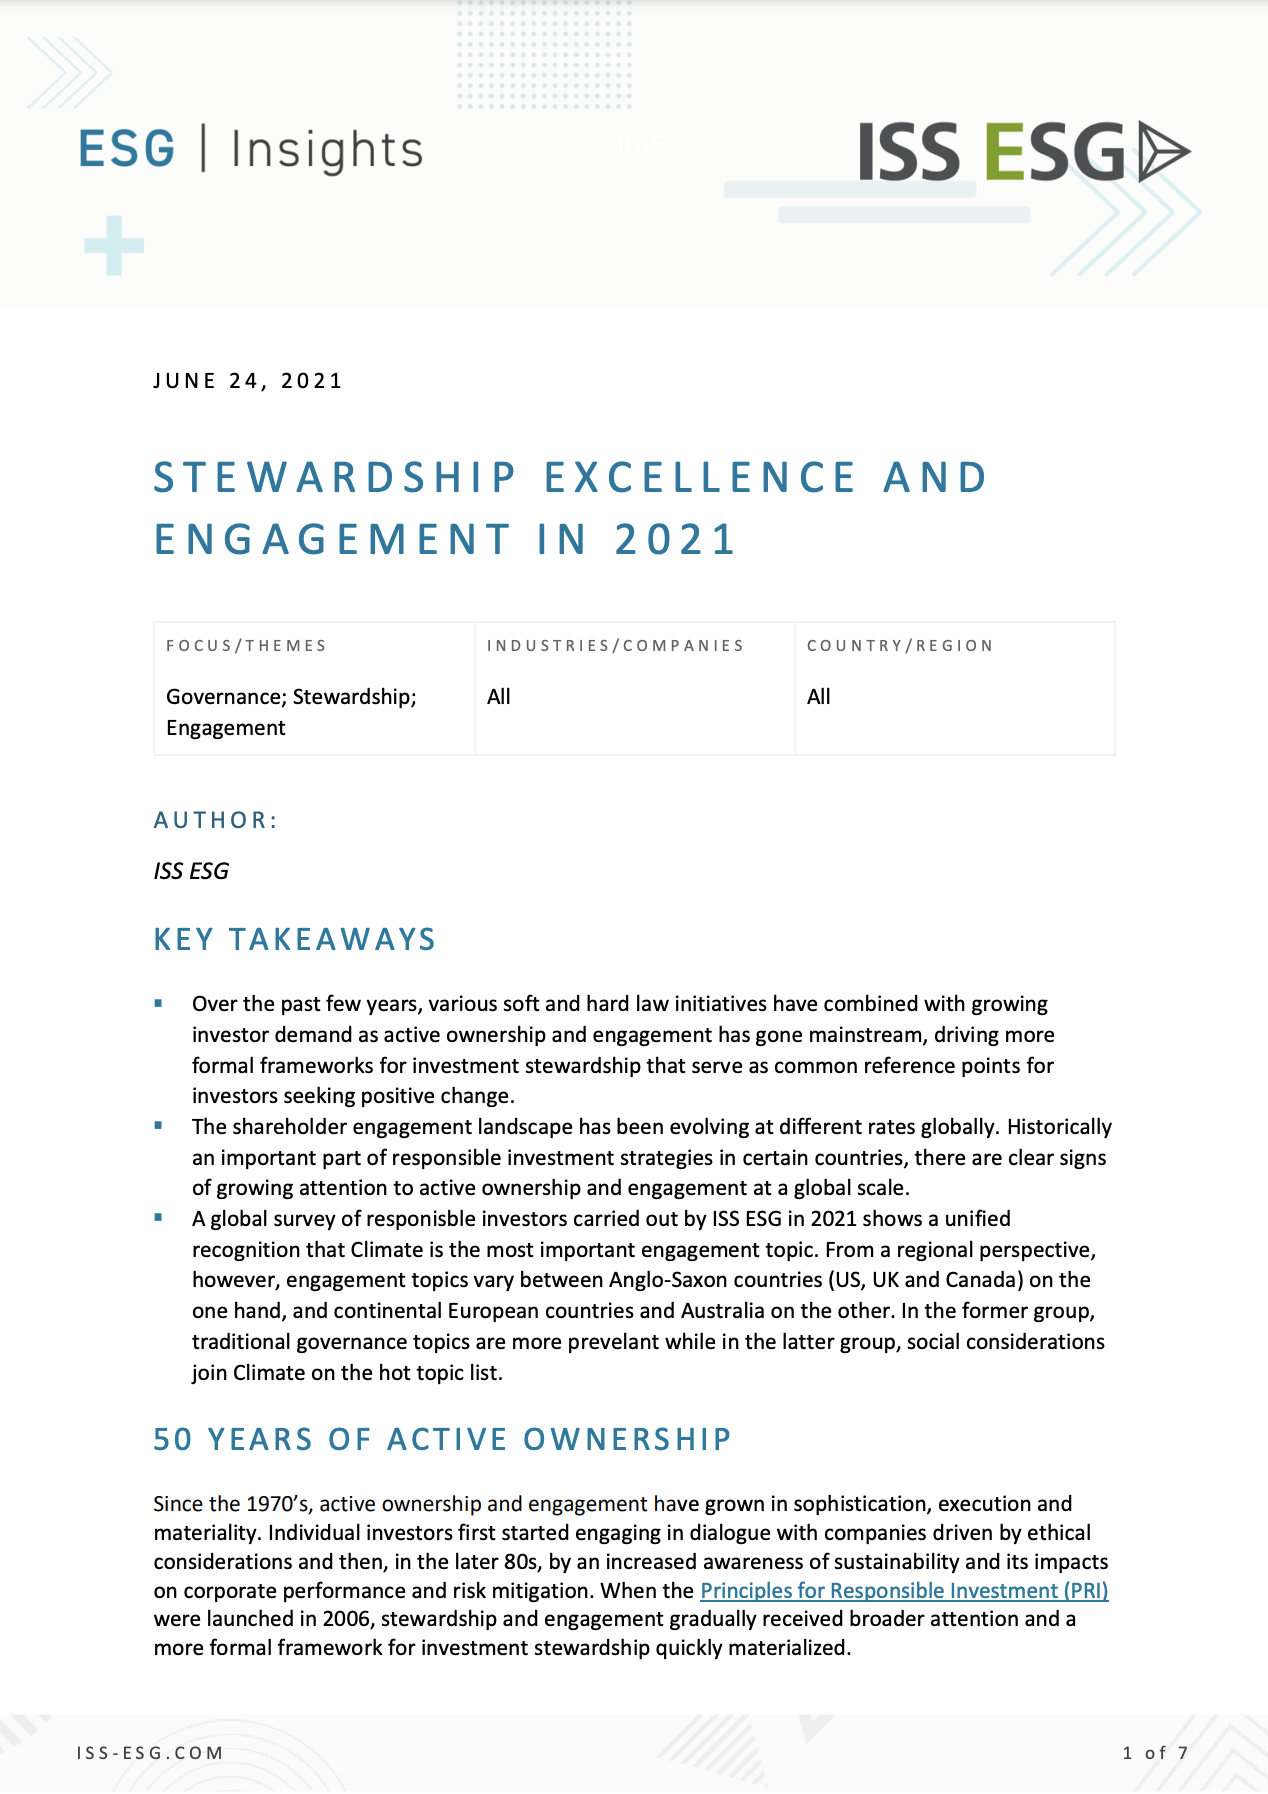 esg-stewardship-excellence-engagement-2021-cover